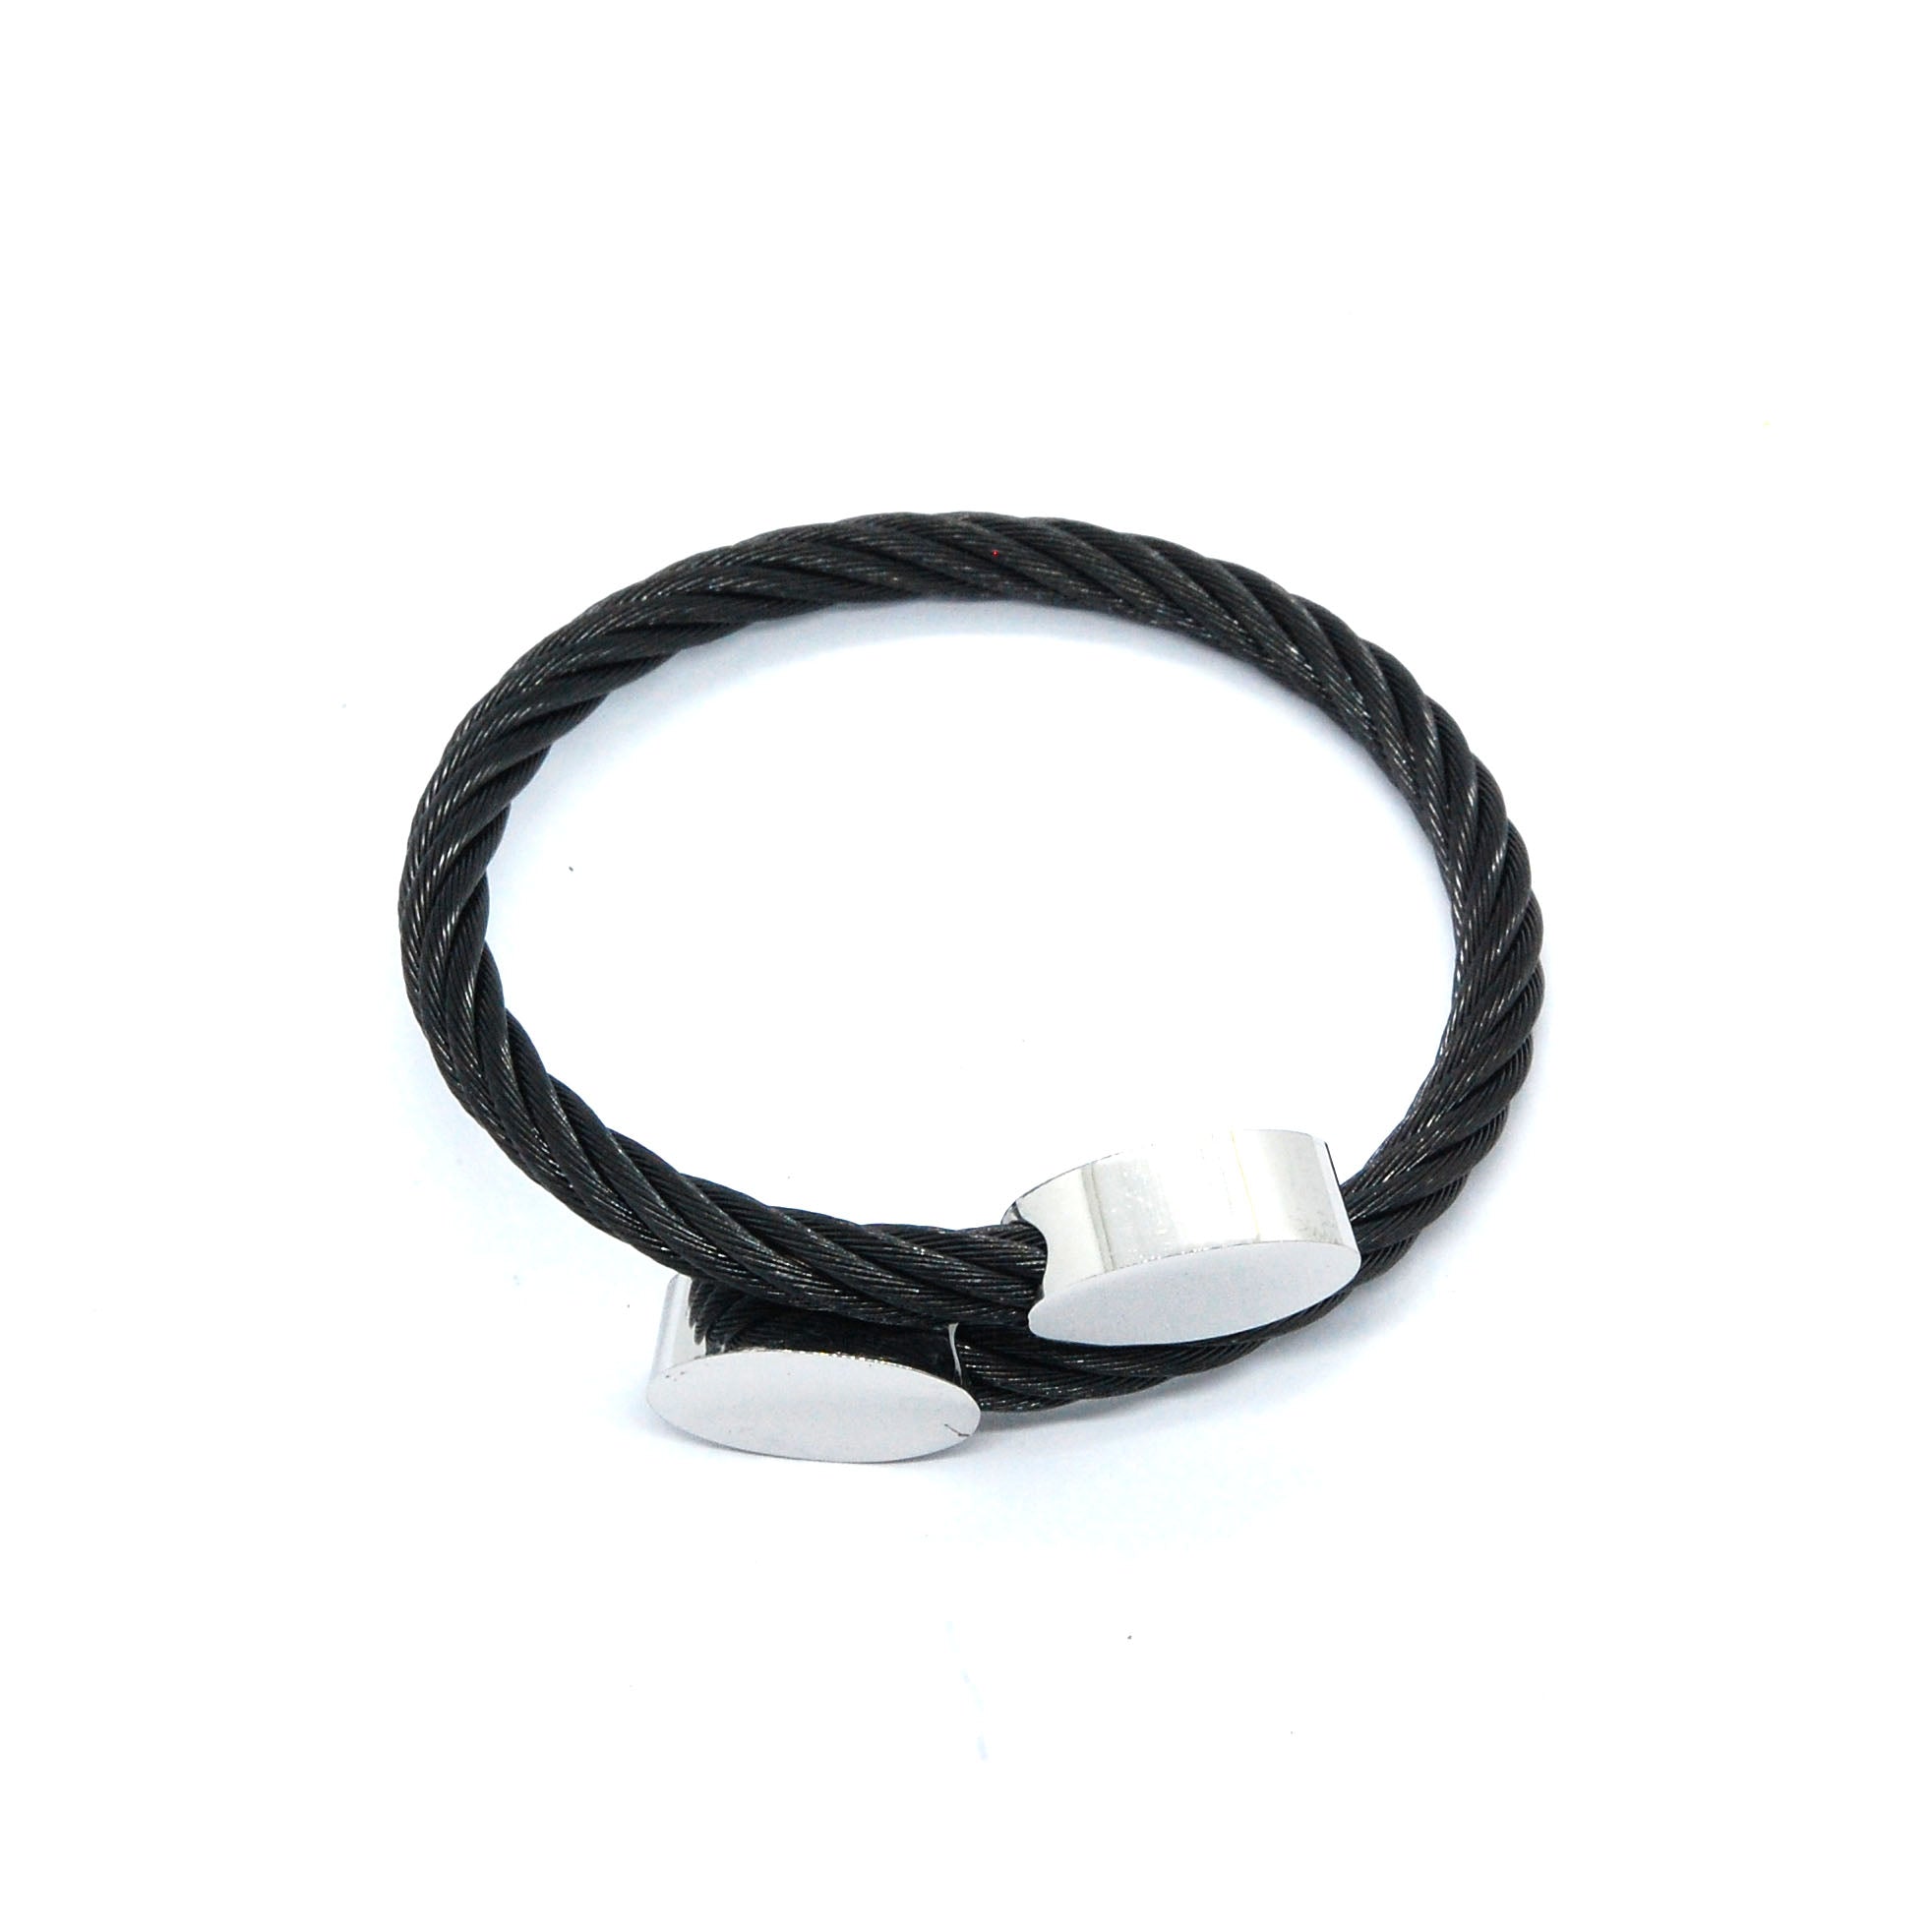 ESBG 6712: All Black Plated Twisted Charriol Bangle w/ White Oval Ends